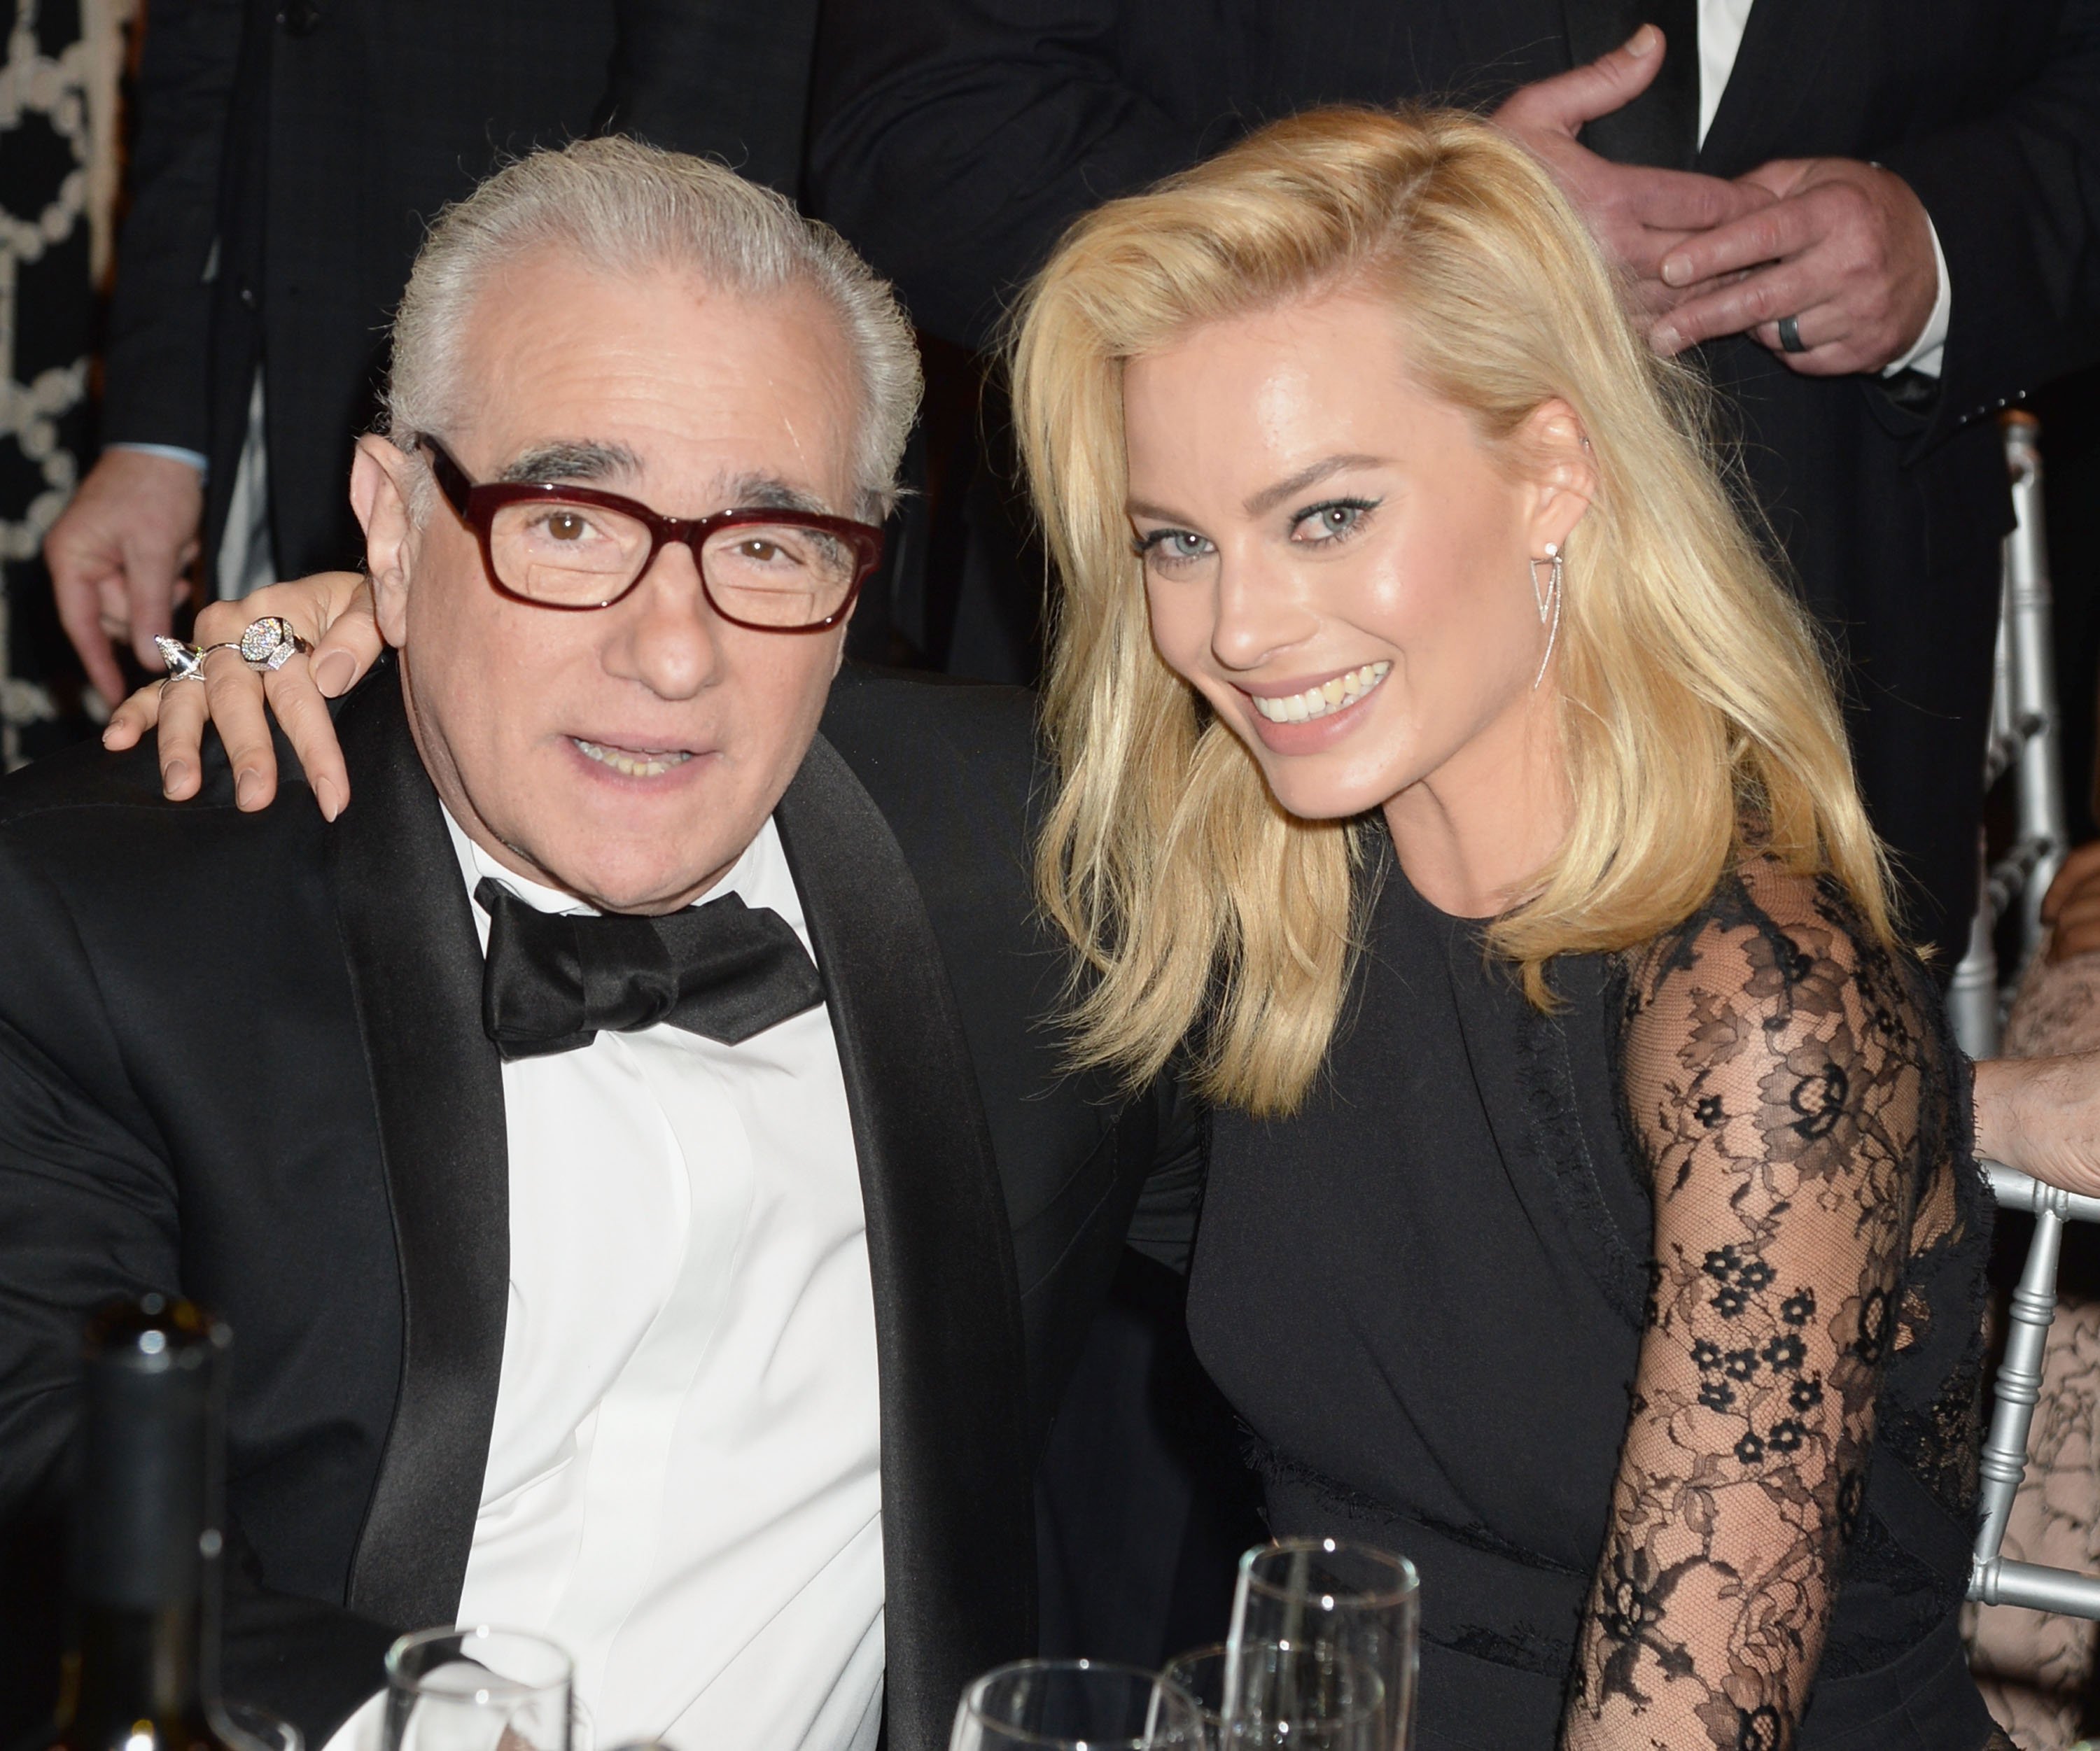 Director Martin Scorsese and actress Margot Robbie attend the 19th Annual Critics' Choice Movie Awards at Barker Hangar on January 16, 2014 in Santa Monica, California. (